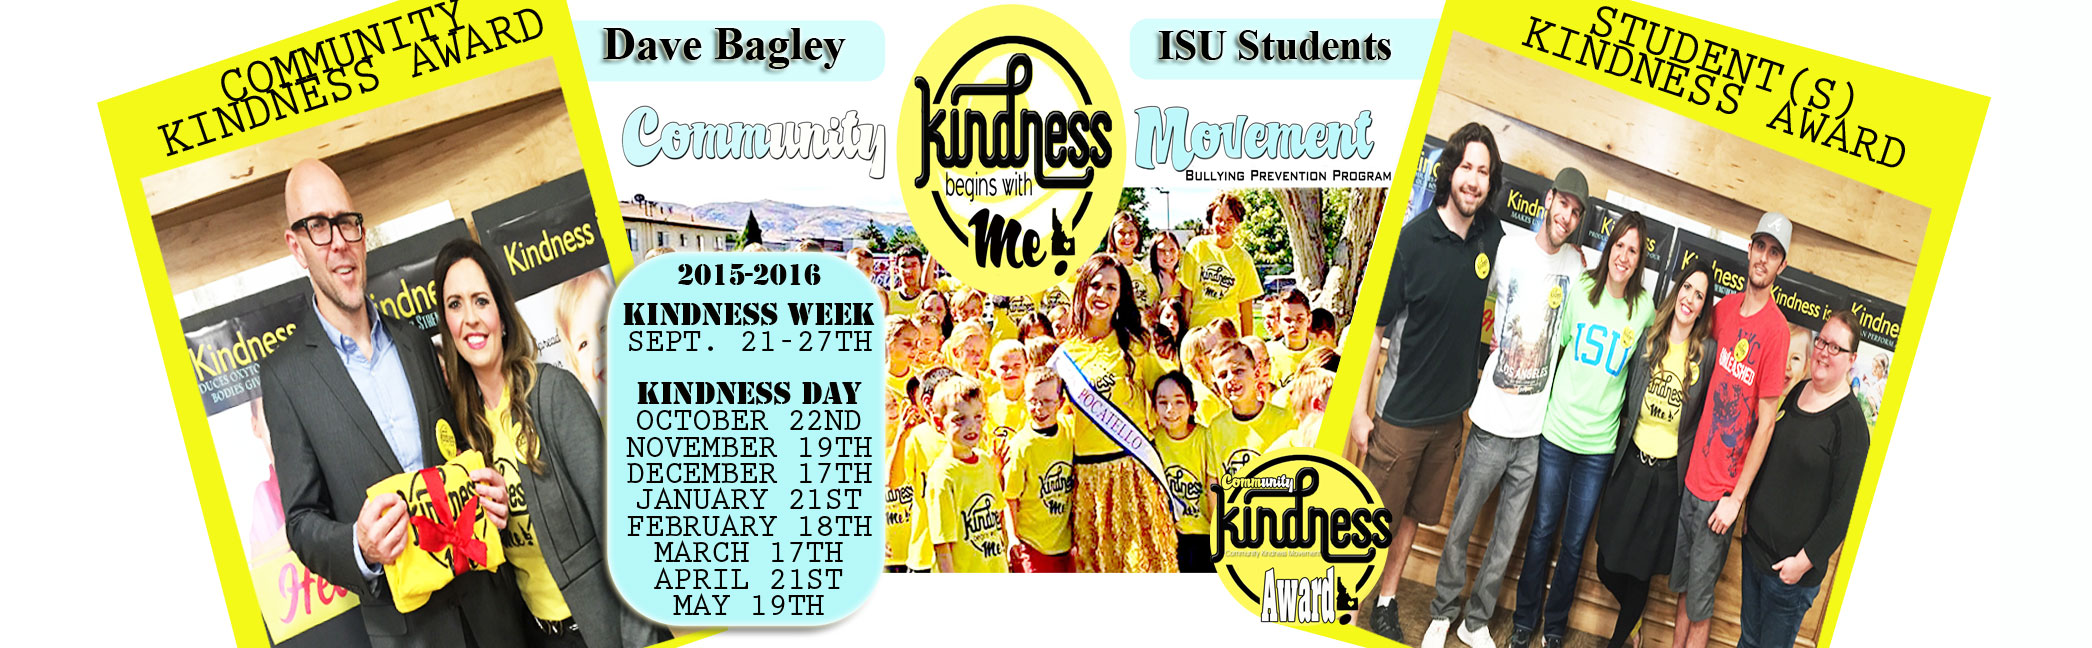 CKM Announcement and April Kindness Award Winners